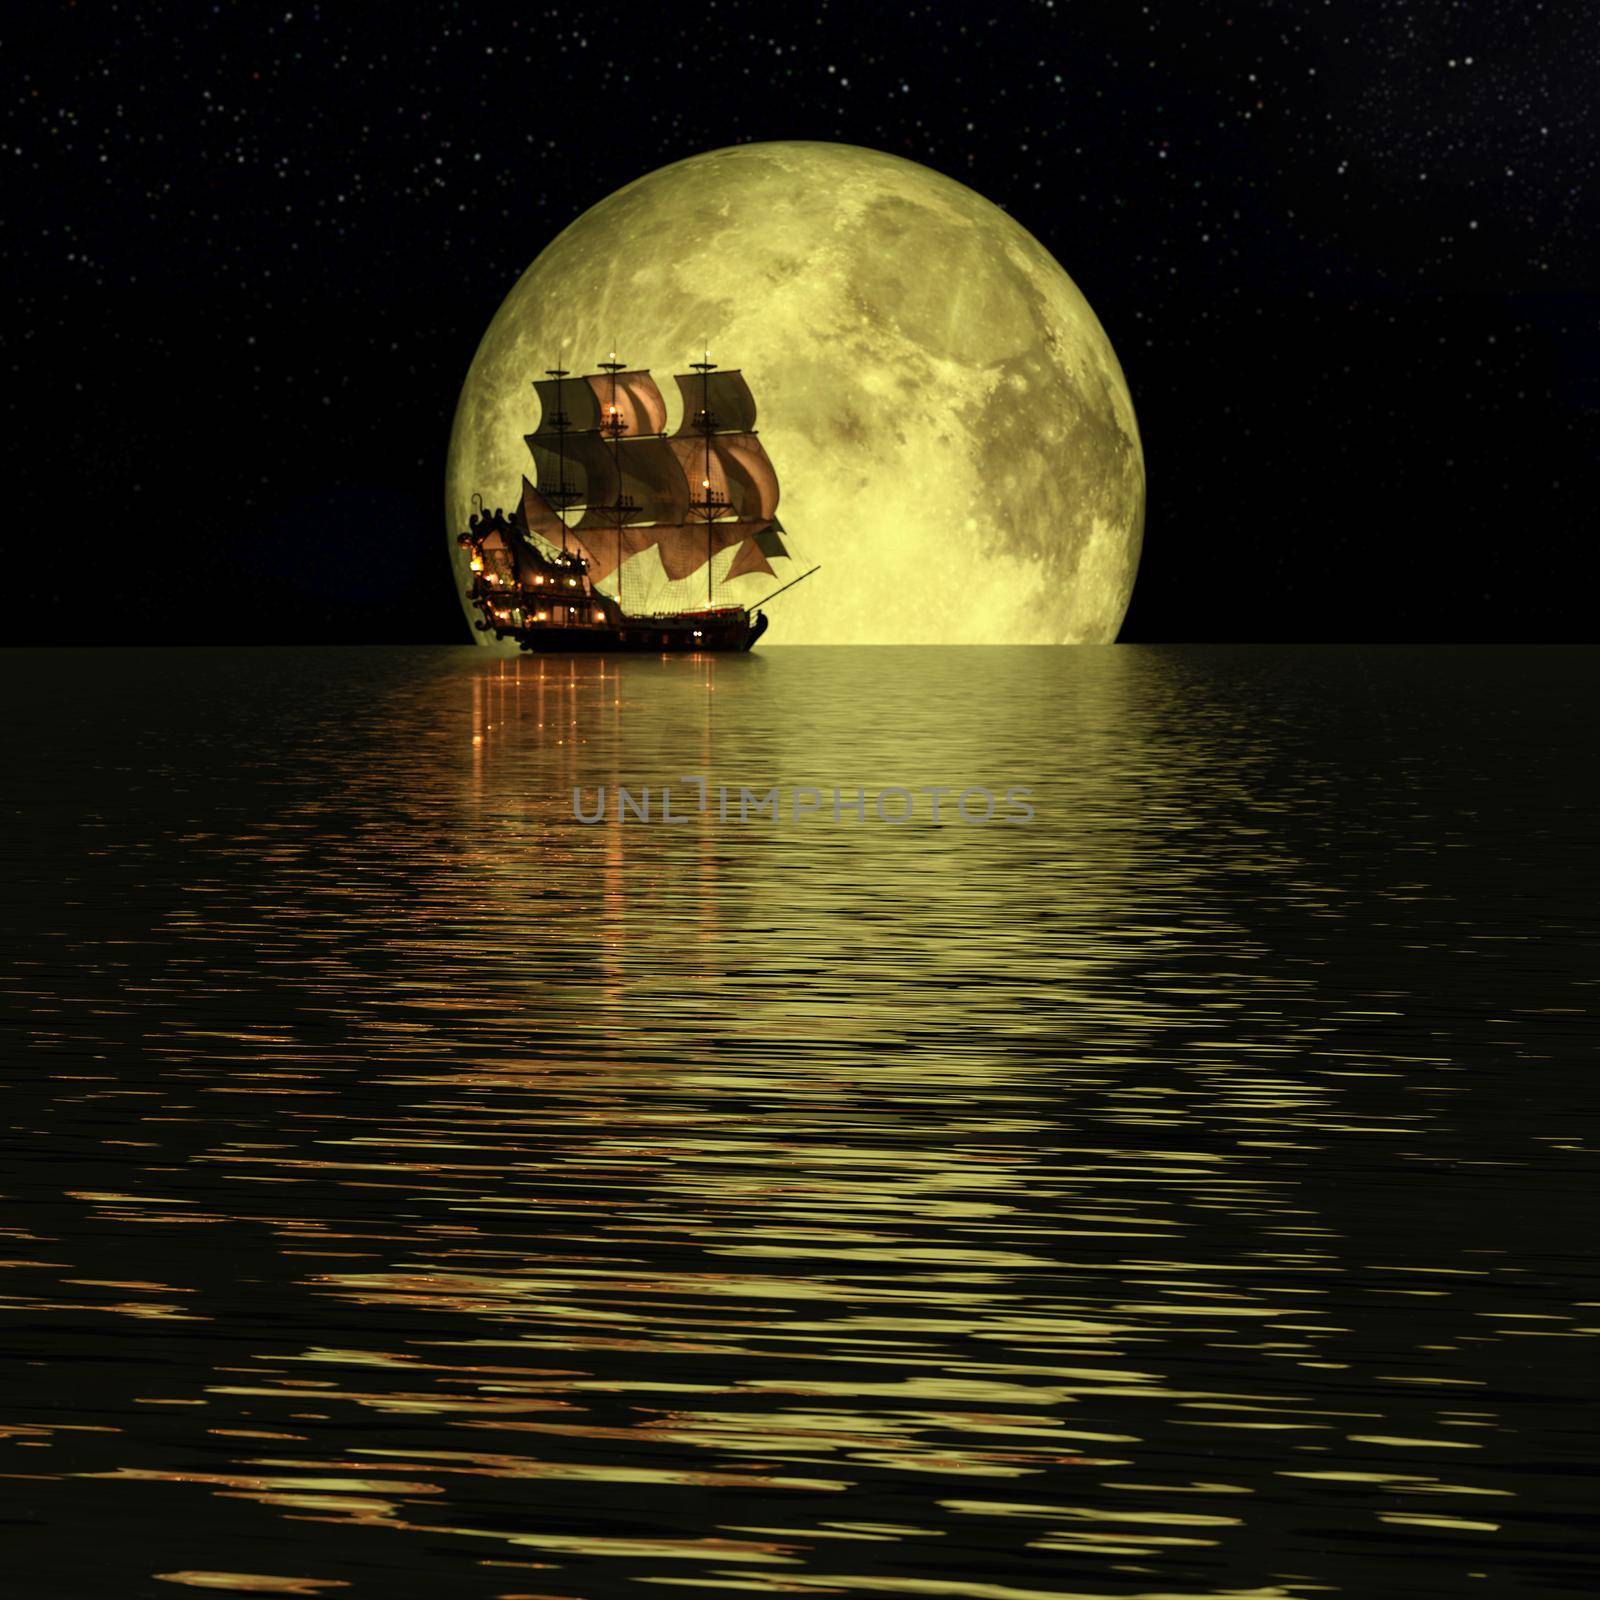 Lonely pirate sail ship in a calm ocean, full yellow moon, and stars by ankarb